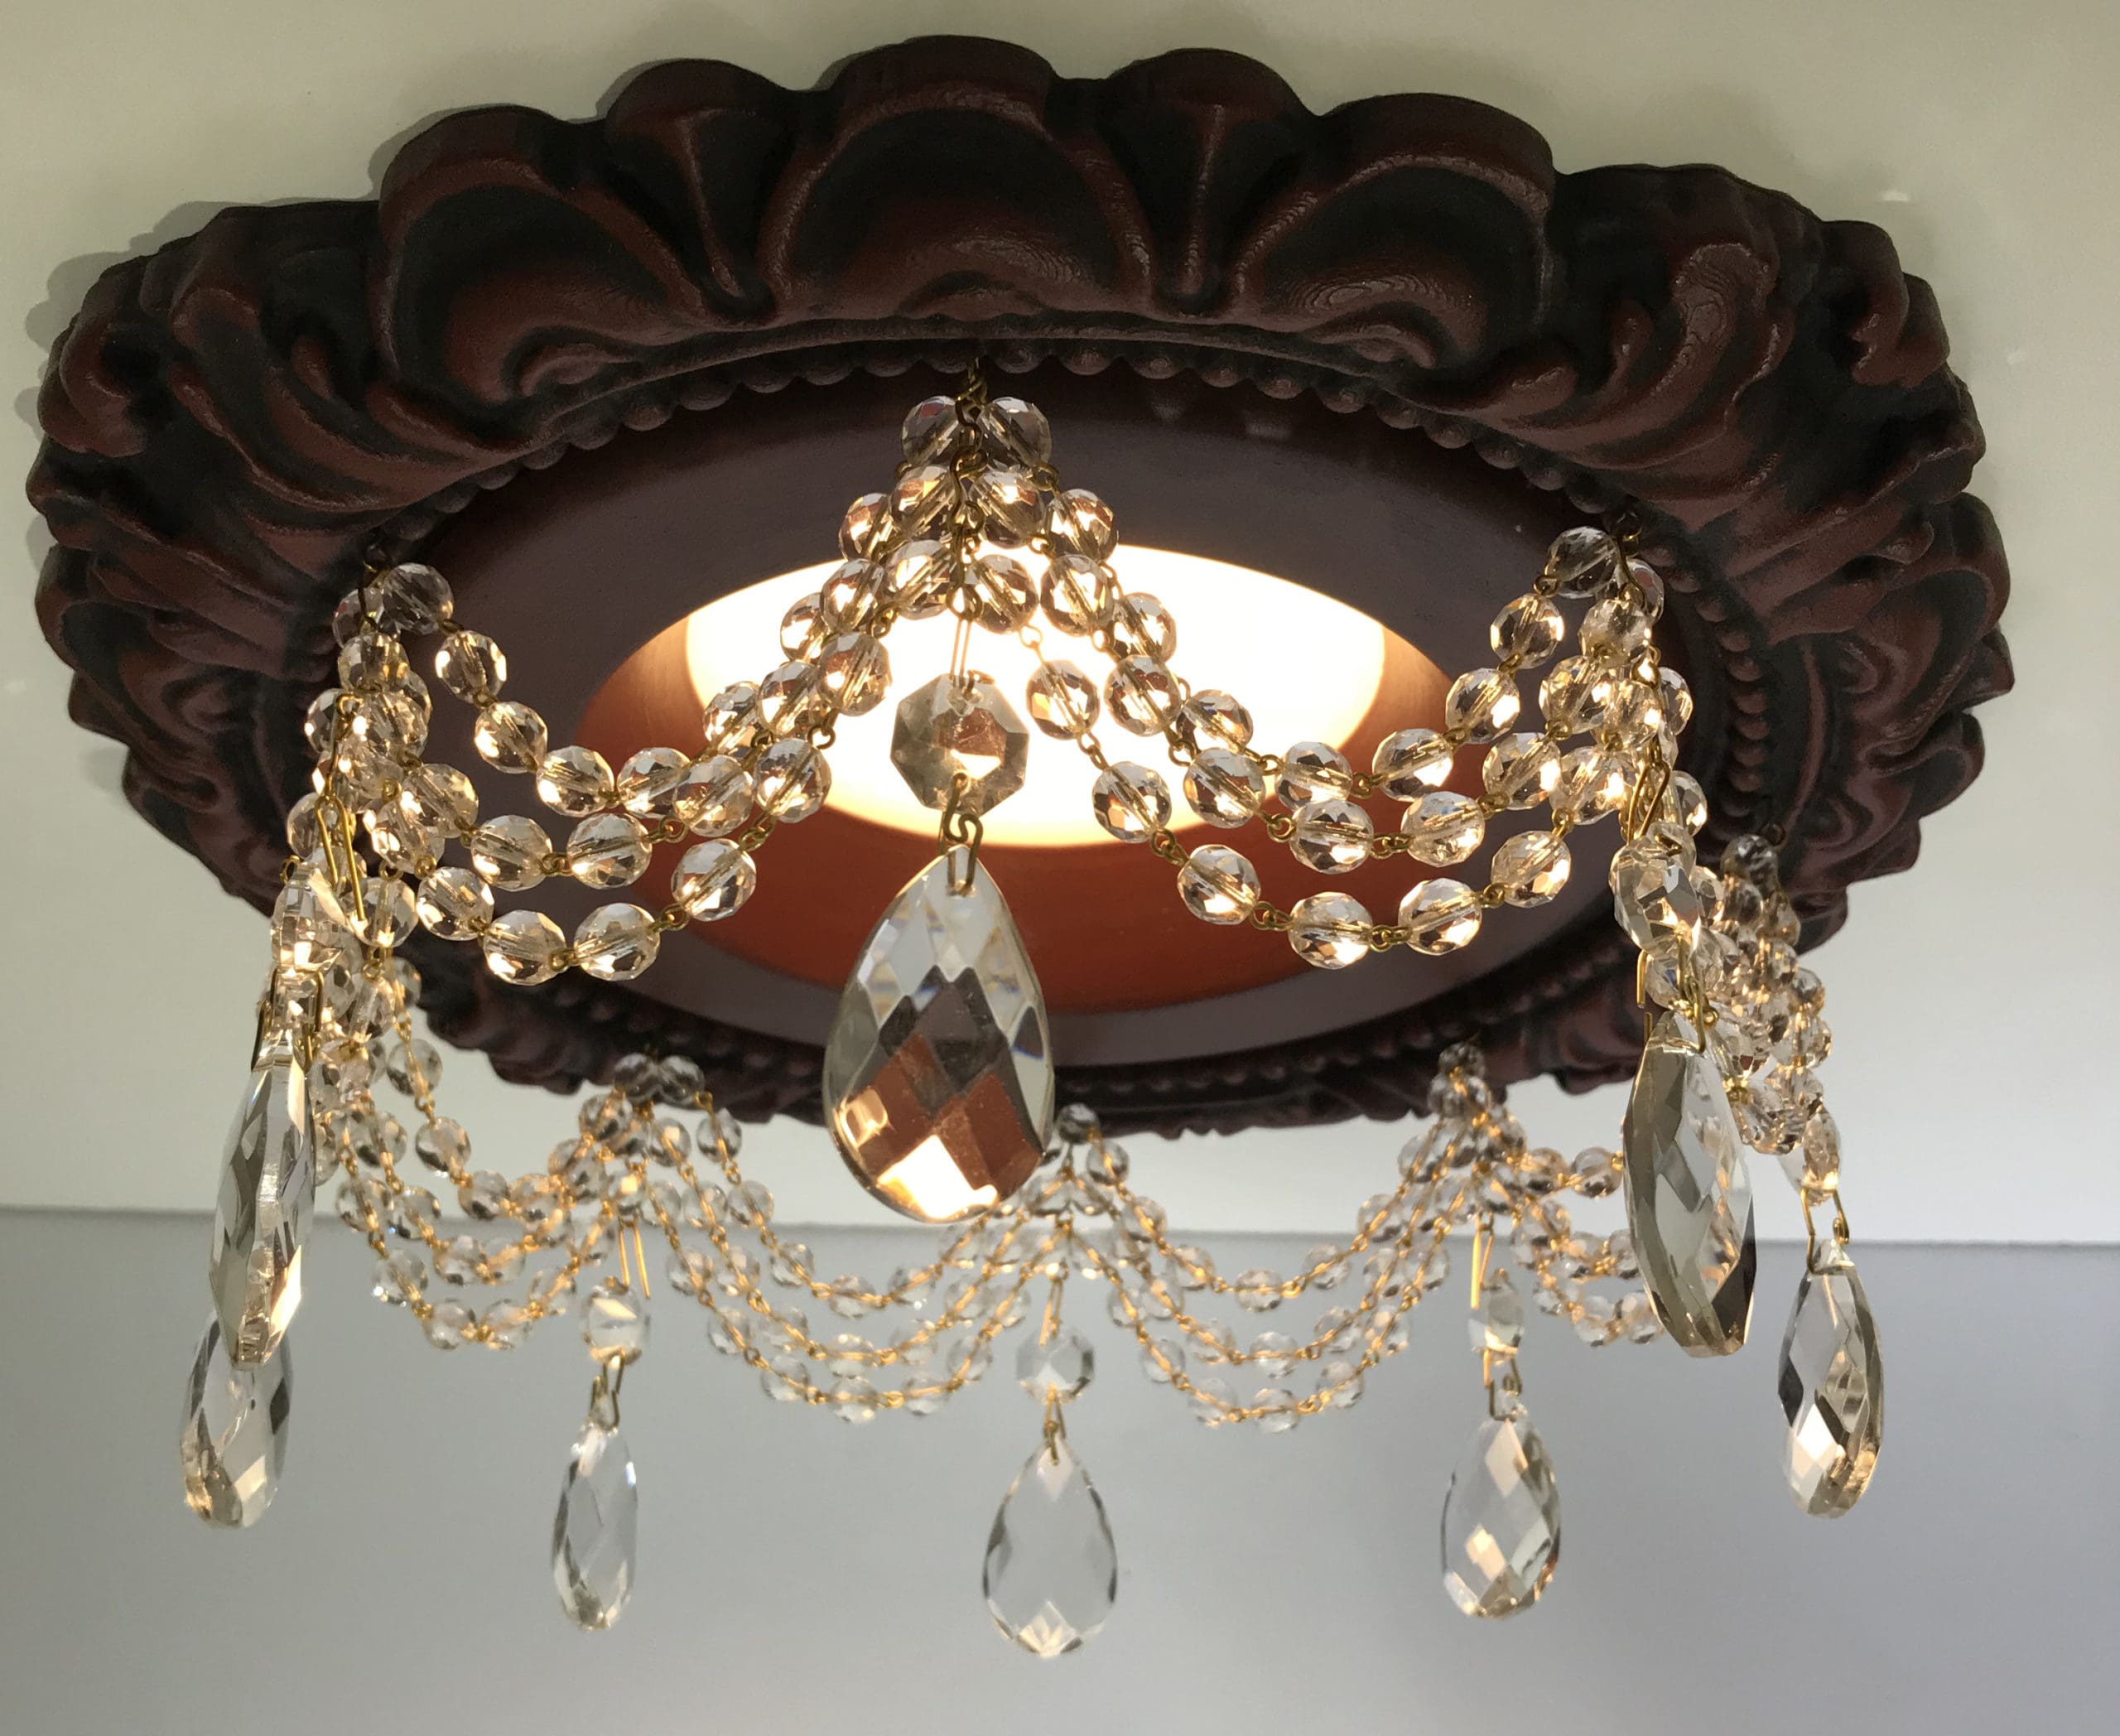 Recessed light trim with 3 swags of clear crystal and 1-1/2" tear drop crystals.